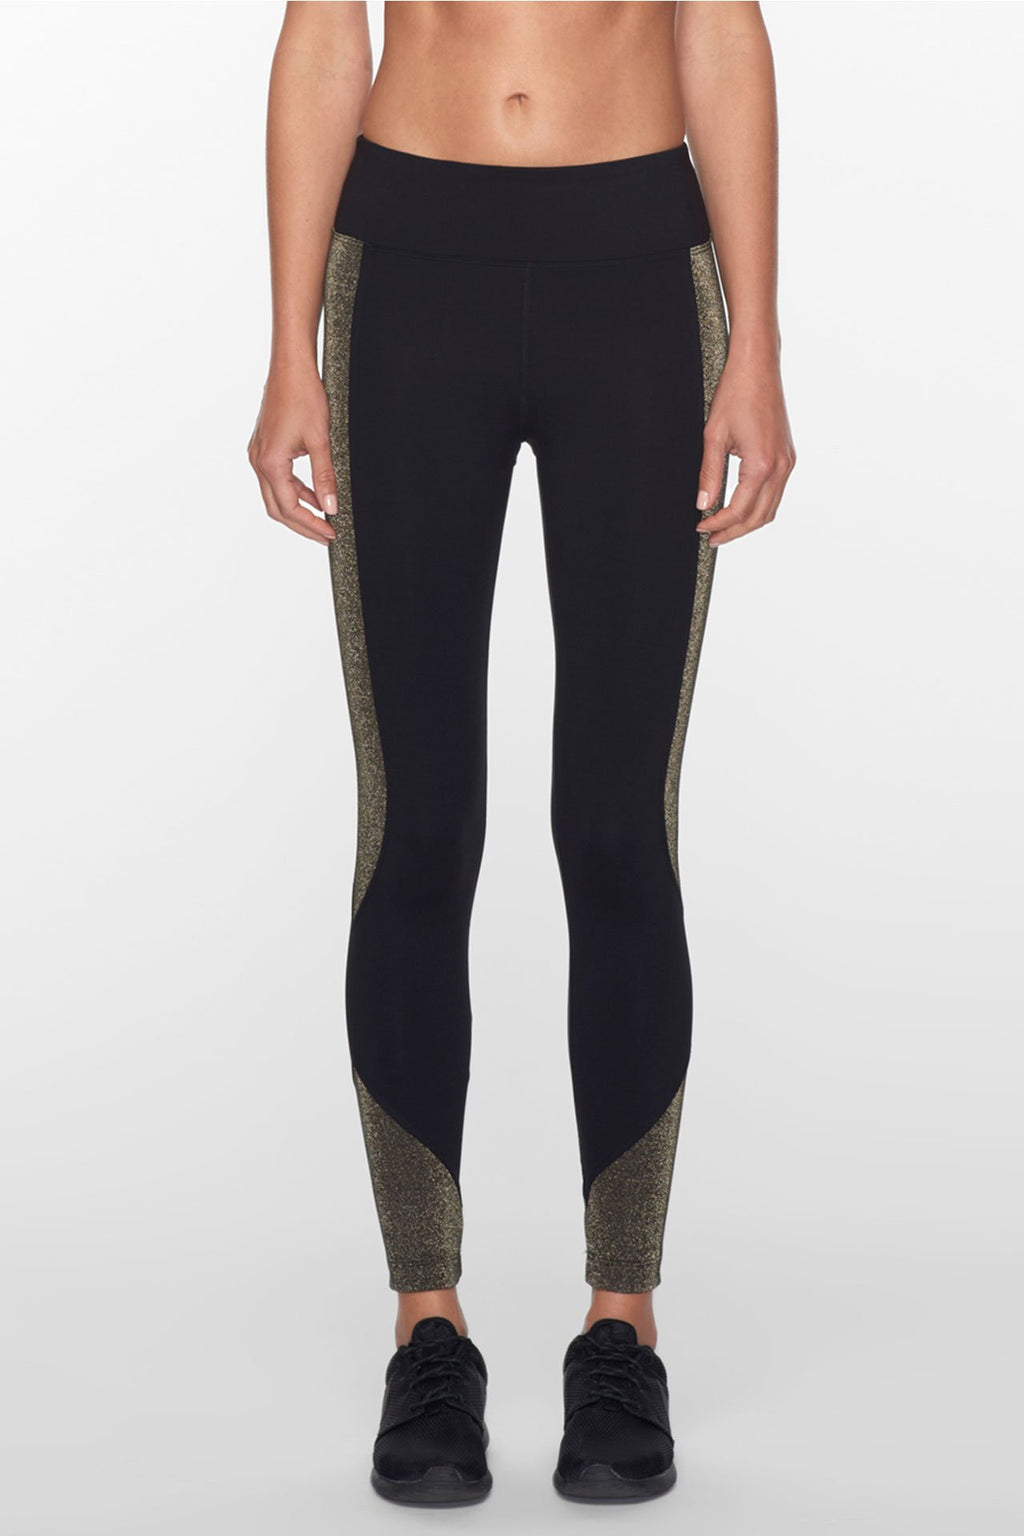 KORAL Lustrous Max High Rise Infinity Legging in Spicy Isle